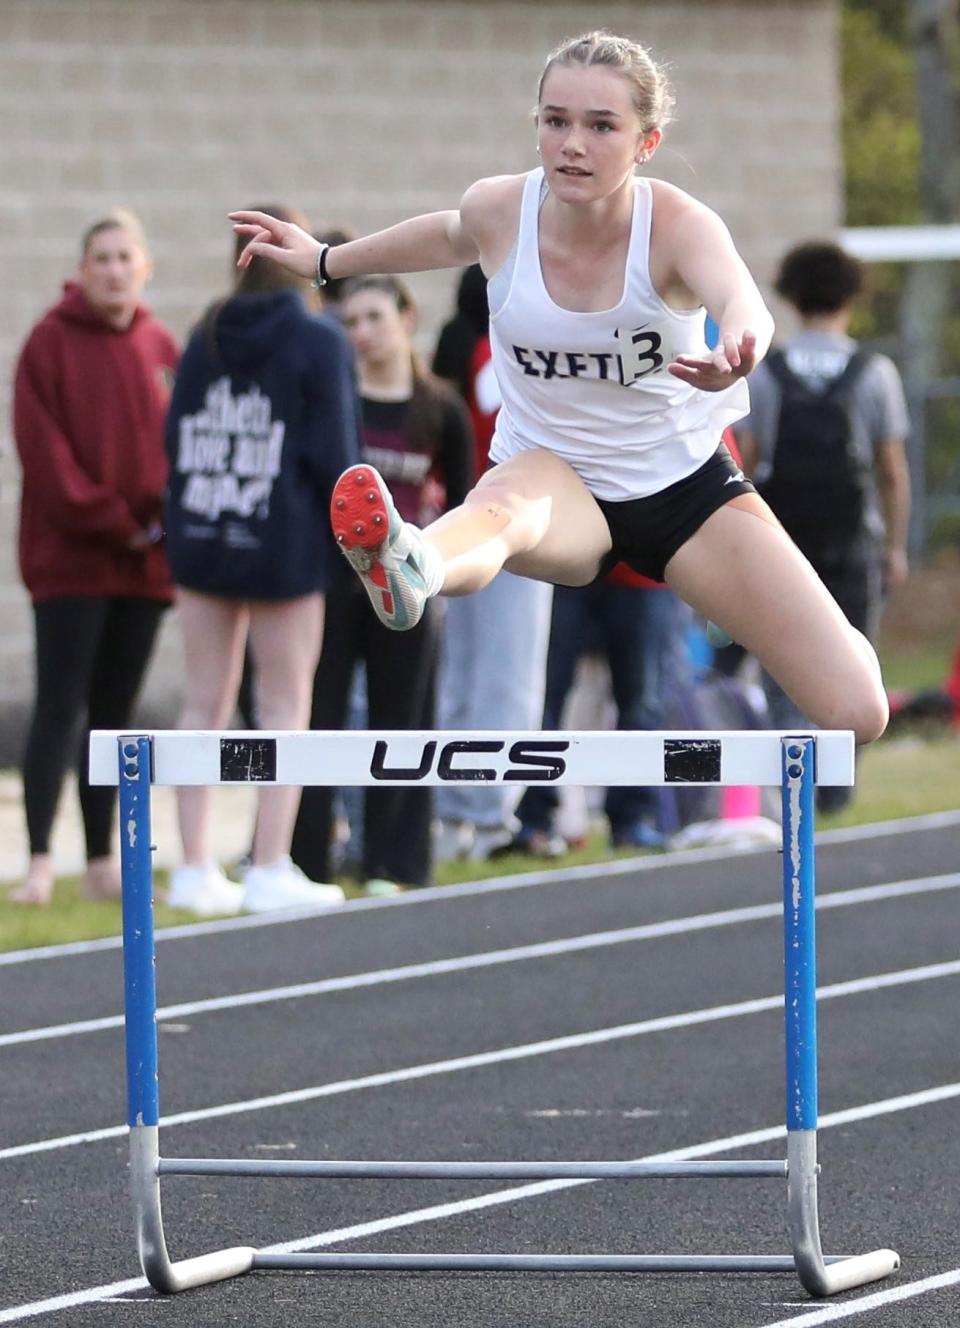 Exeter's Sydney MacVicar competes in the 300 hurdles at the Merrimack Invitational at Merrimack High School. The Blue Hawks won the girls meet with a score of 66, beating Concord by a point.